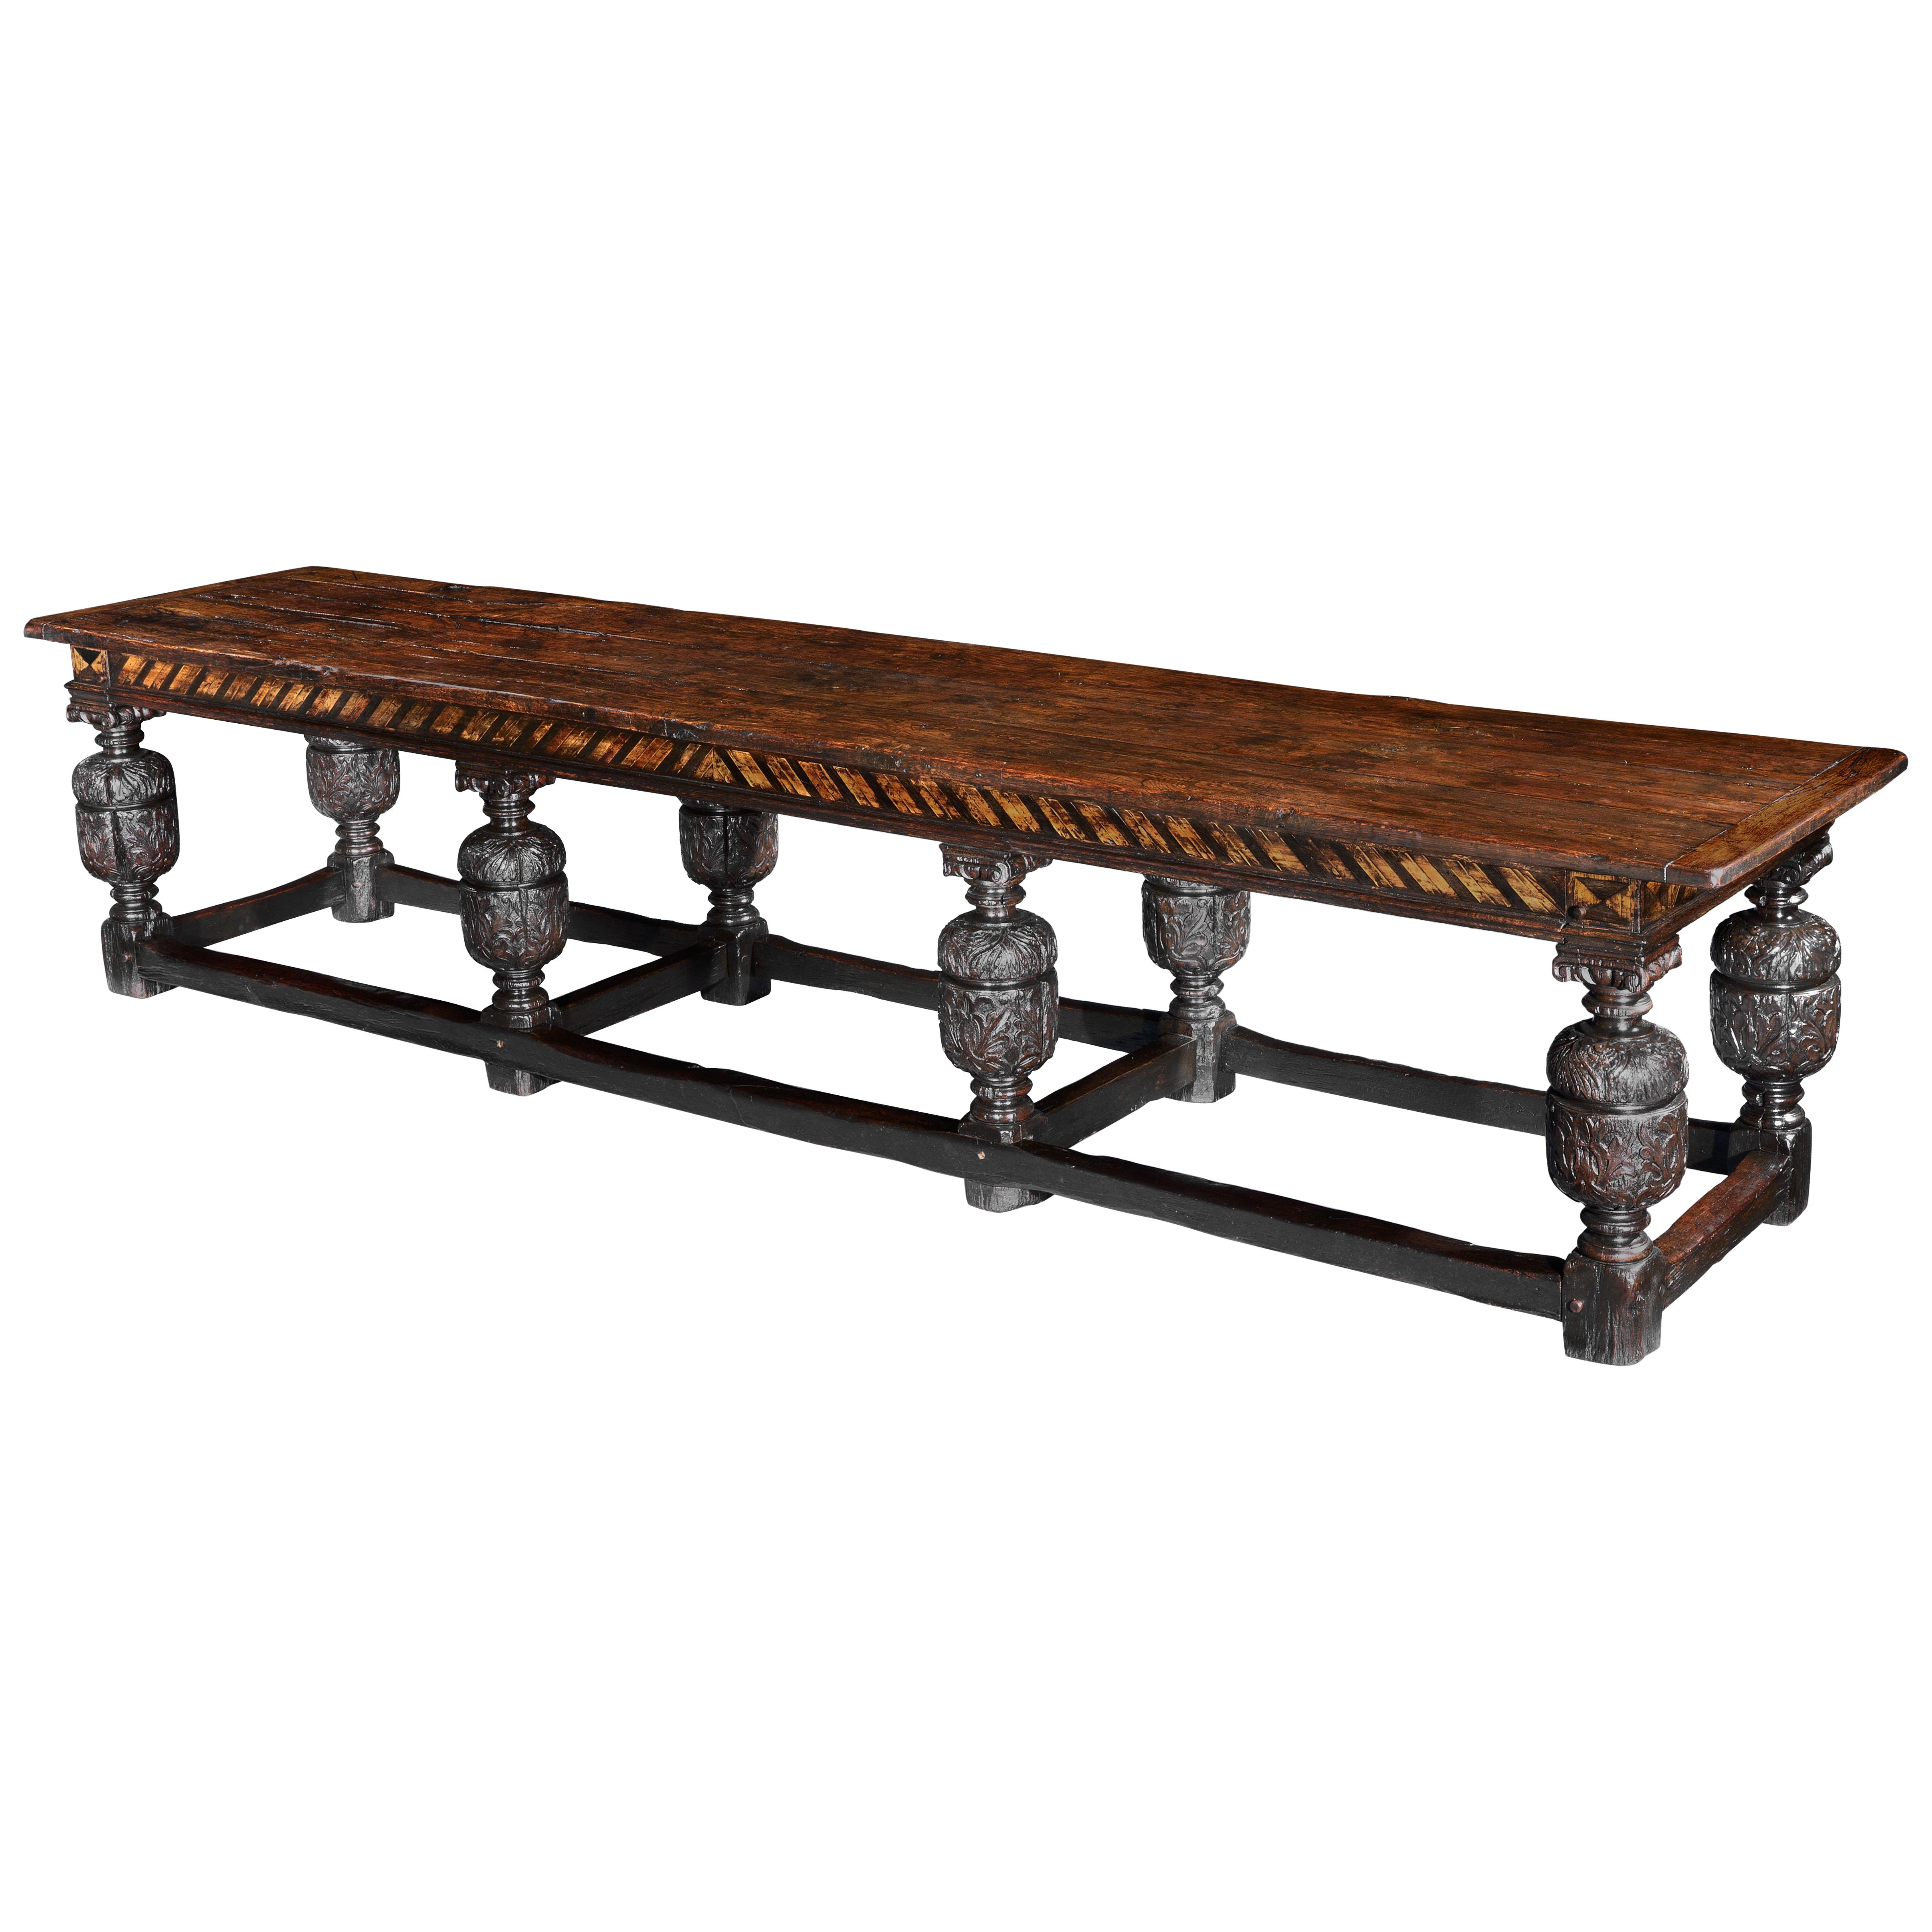 Table Refectory Dining Seats18 Antiquarian Parquetry Elm Oak Box 368cm 145" long For Sale